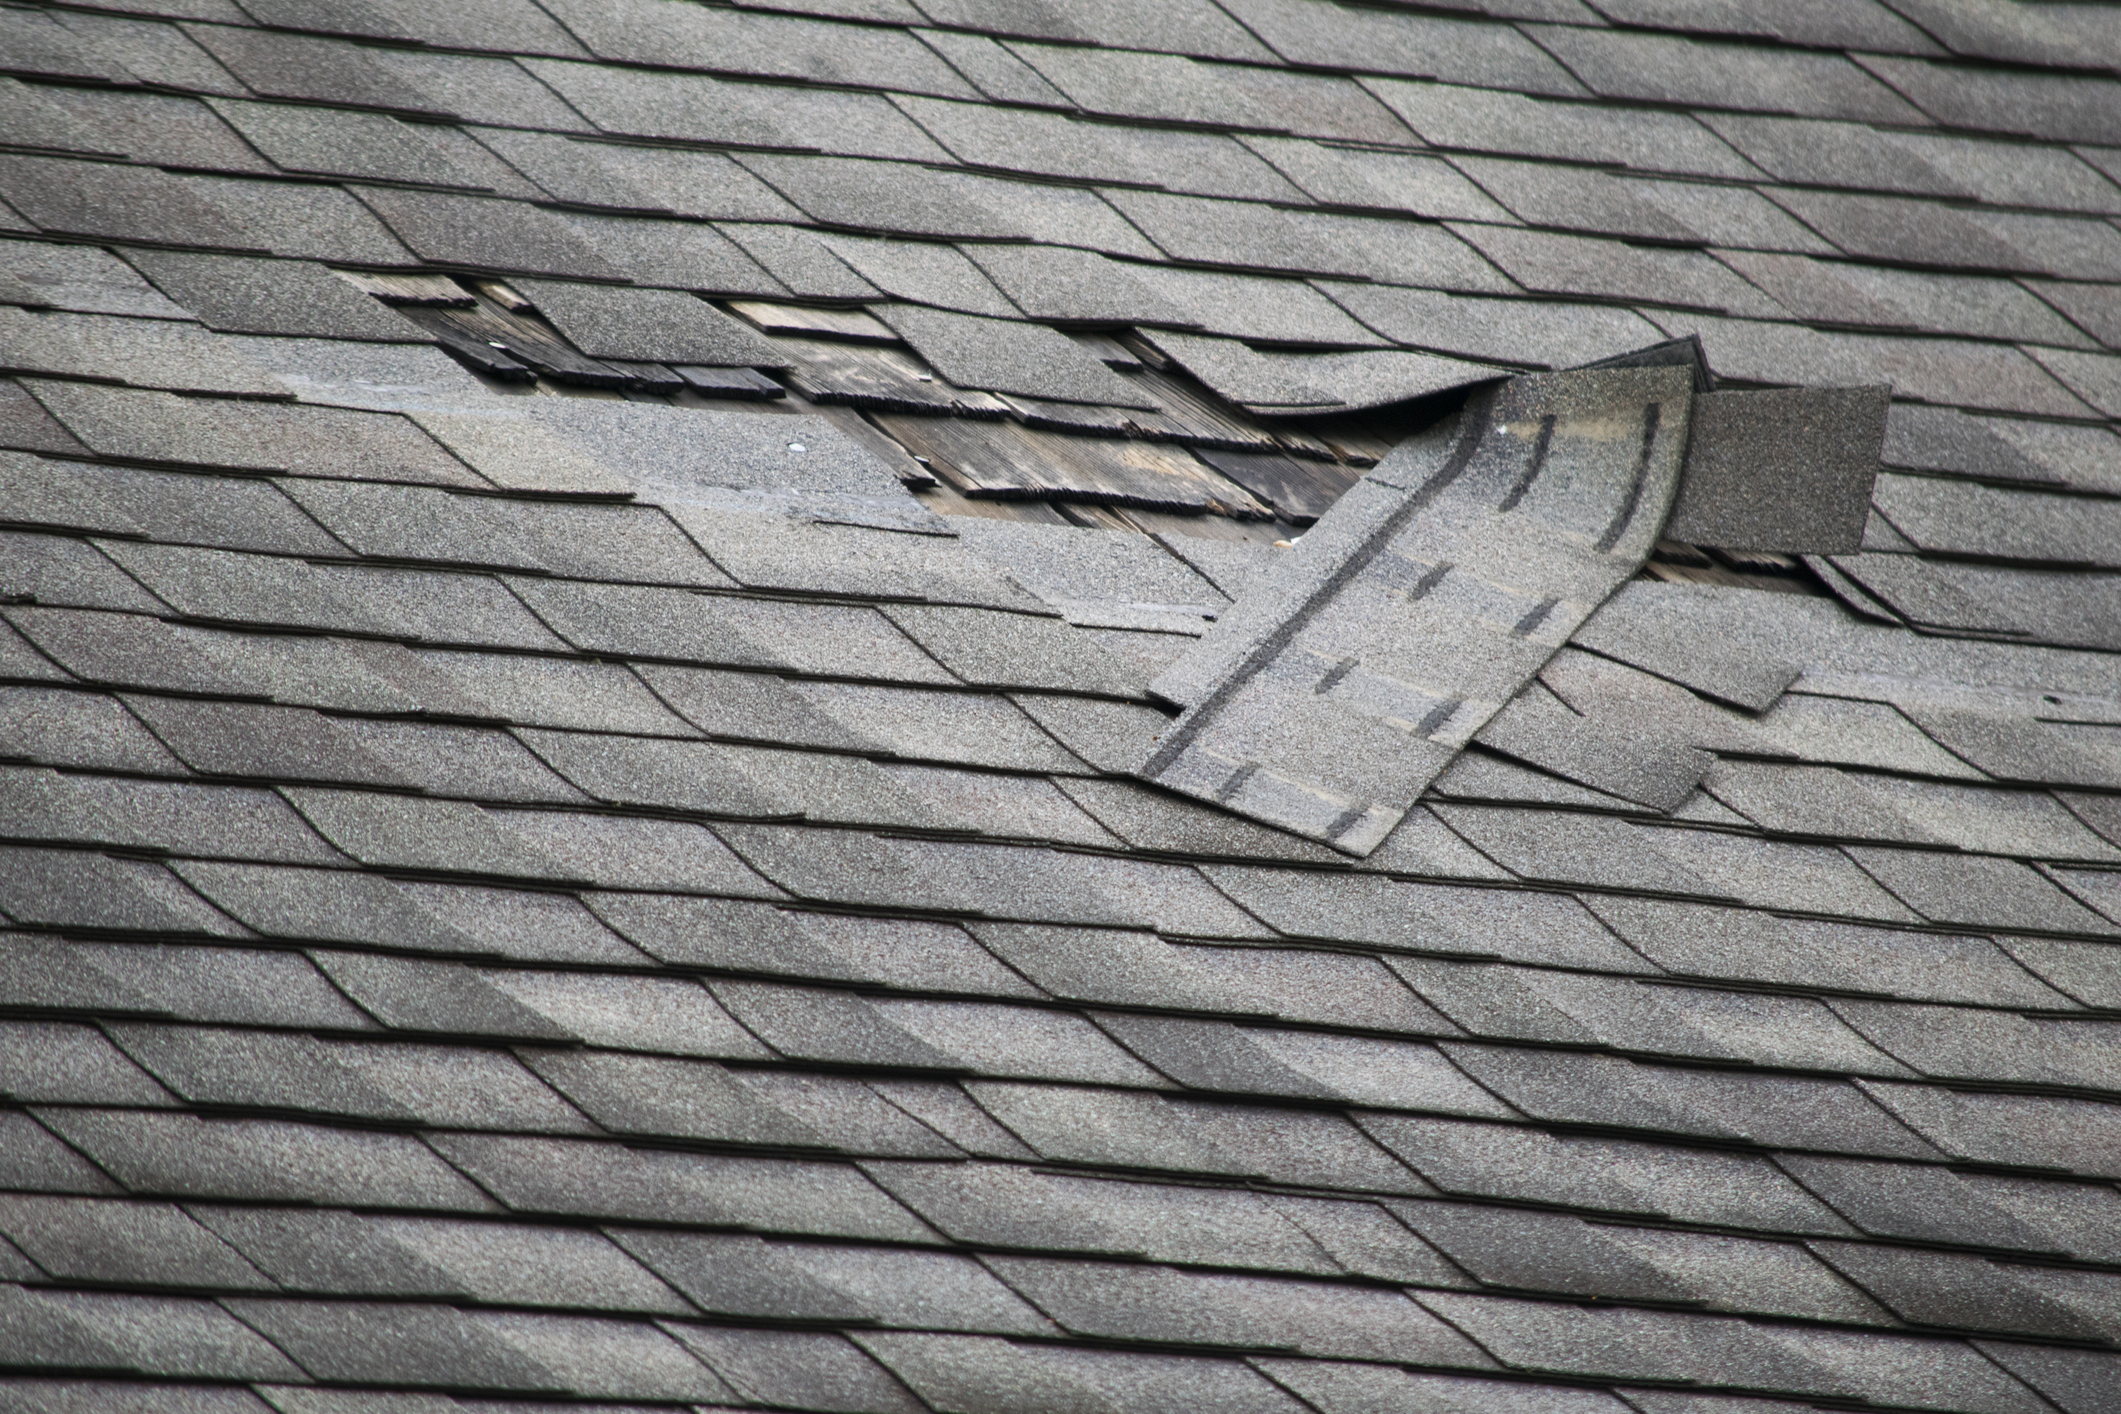 Missing shingles on a roof from poor workmanship